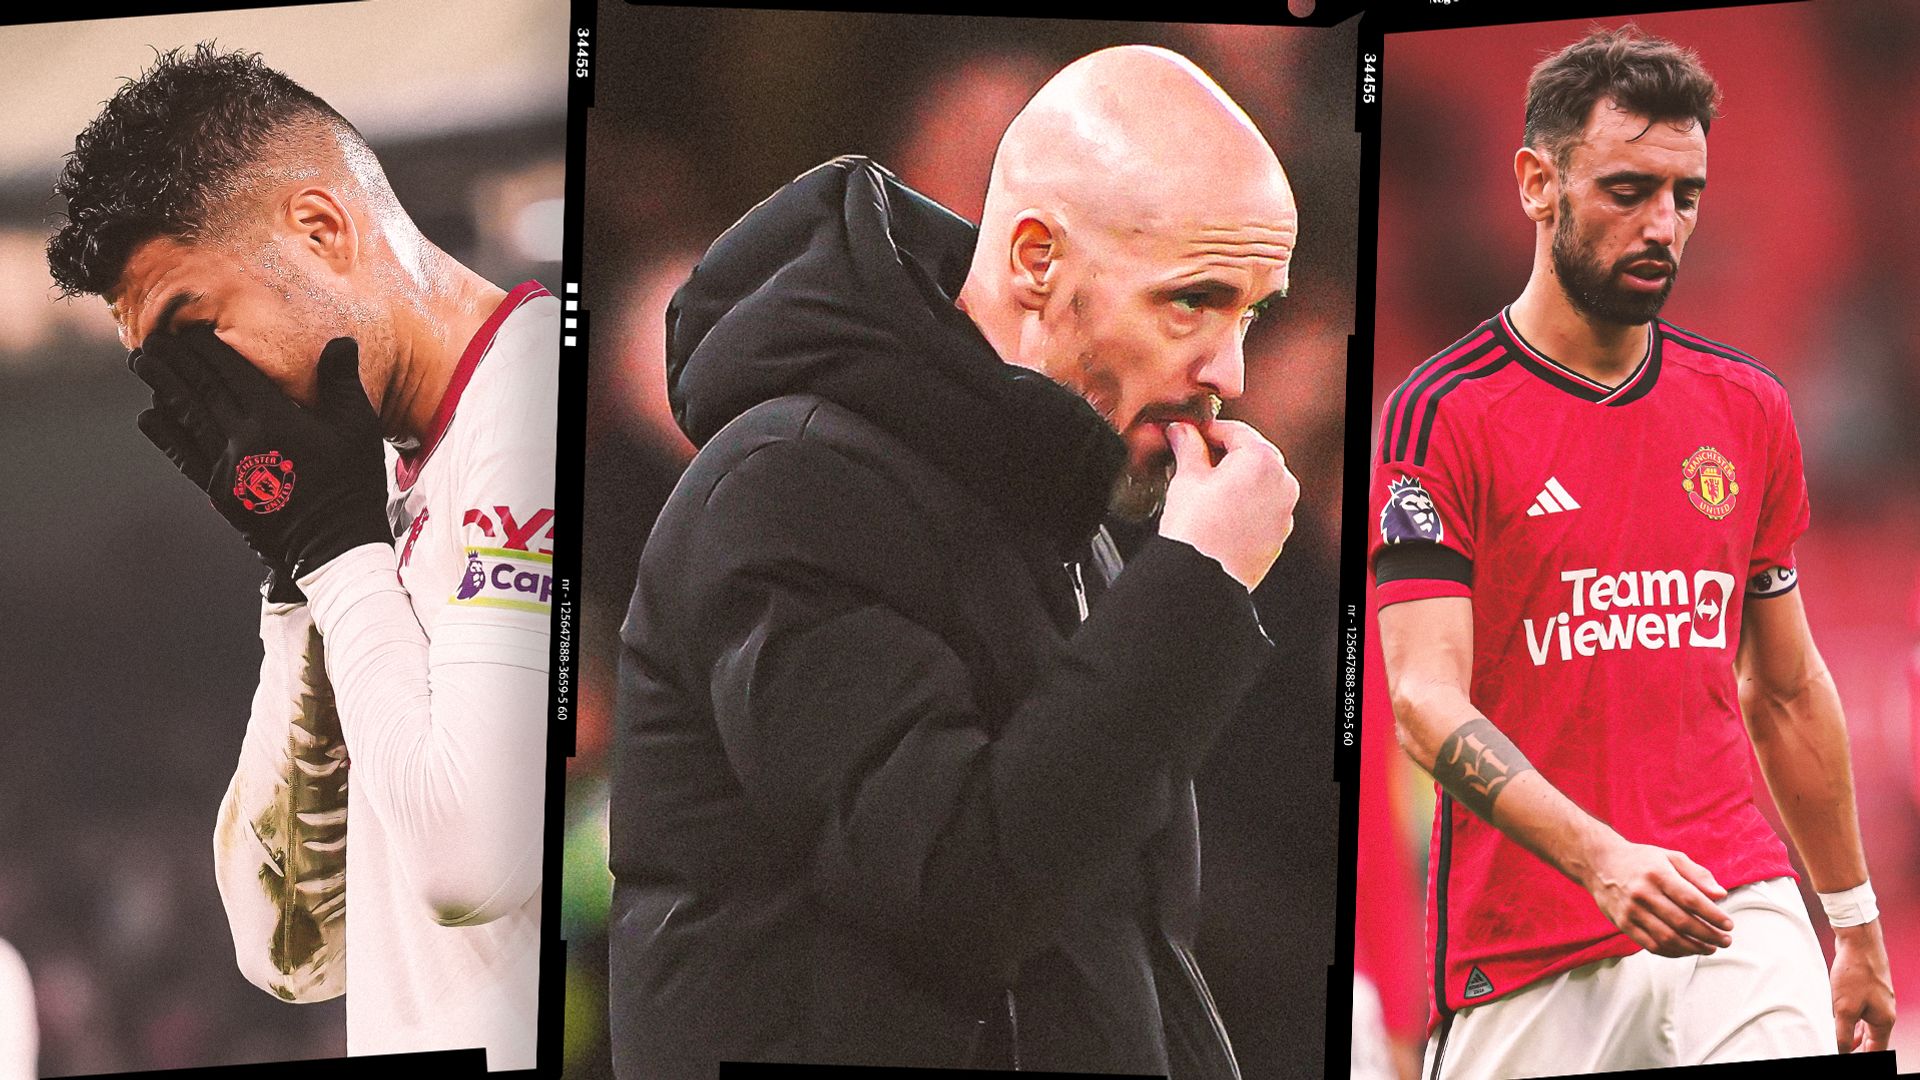 Ten Hag stays, but the numbers show he has plenty to do at Man Utd